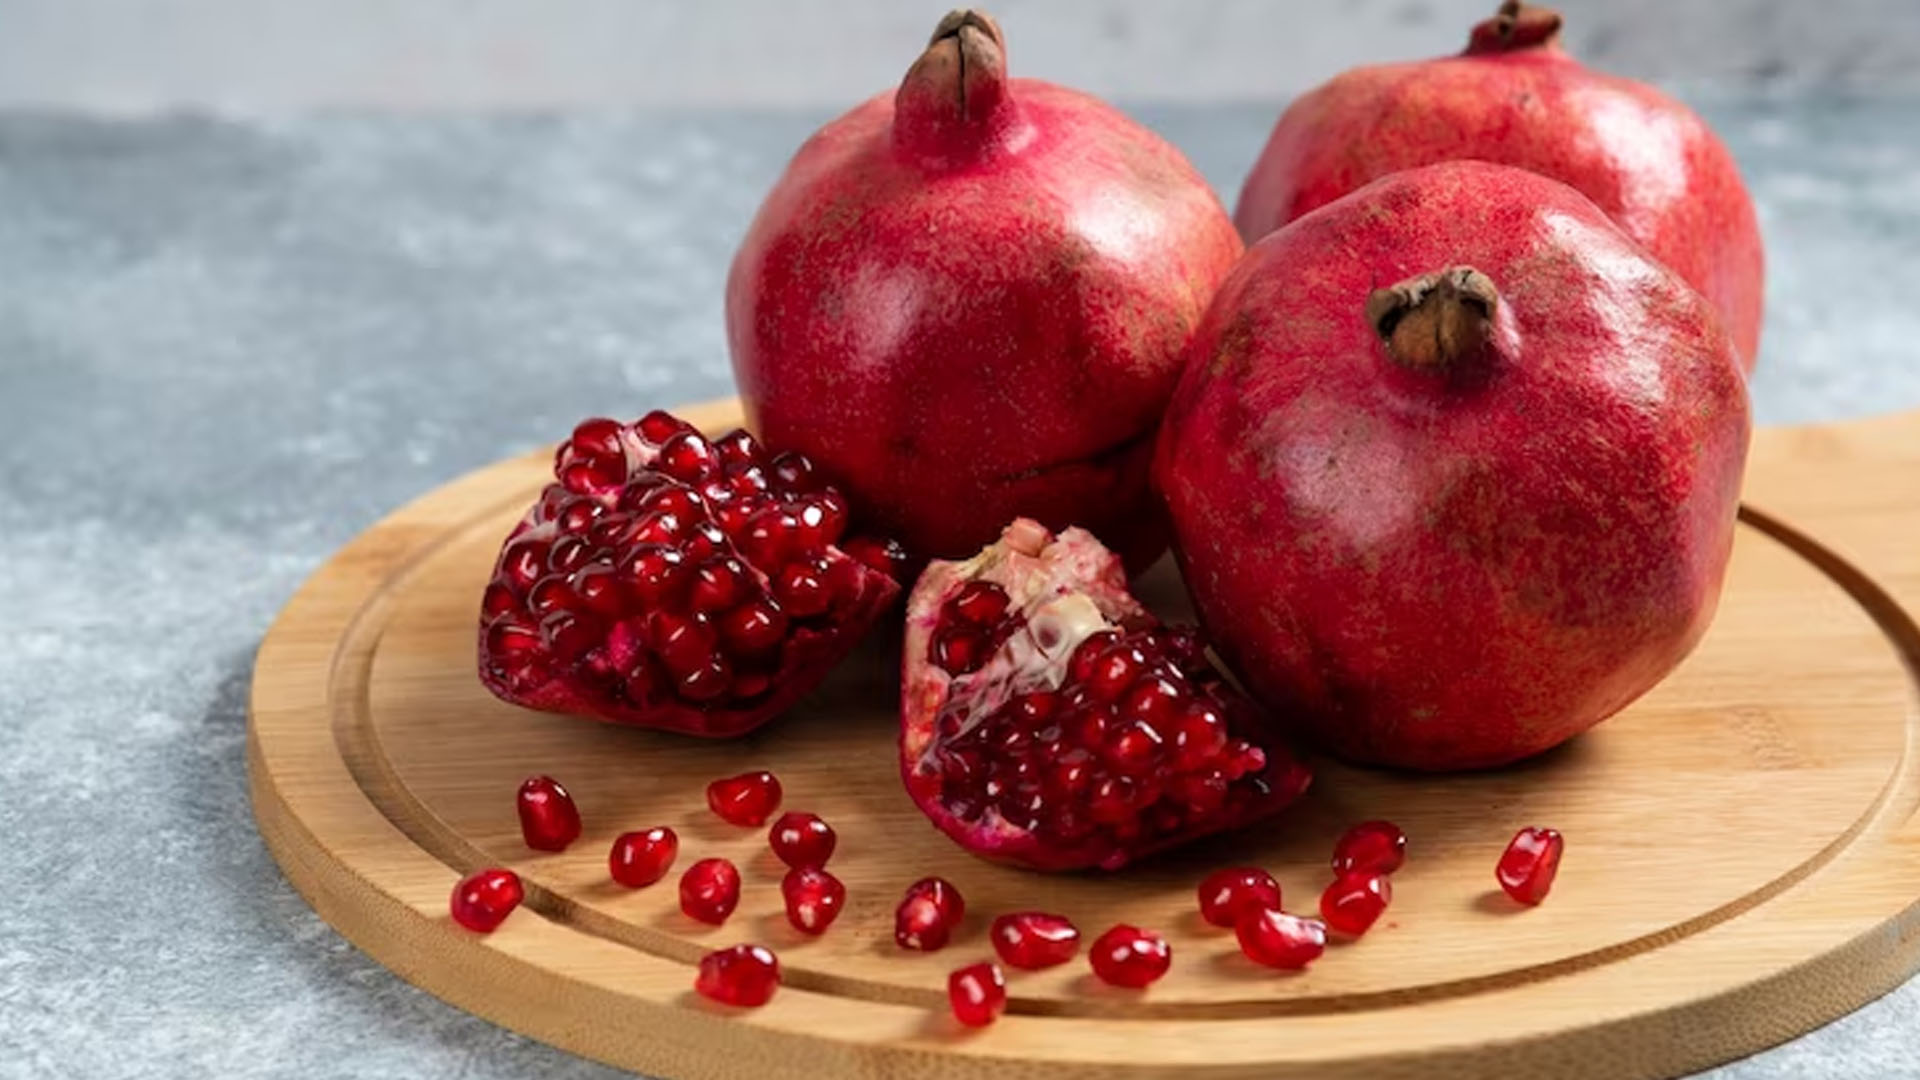 What Are Some Health Benefits Of Pomegranate Seeds?